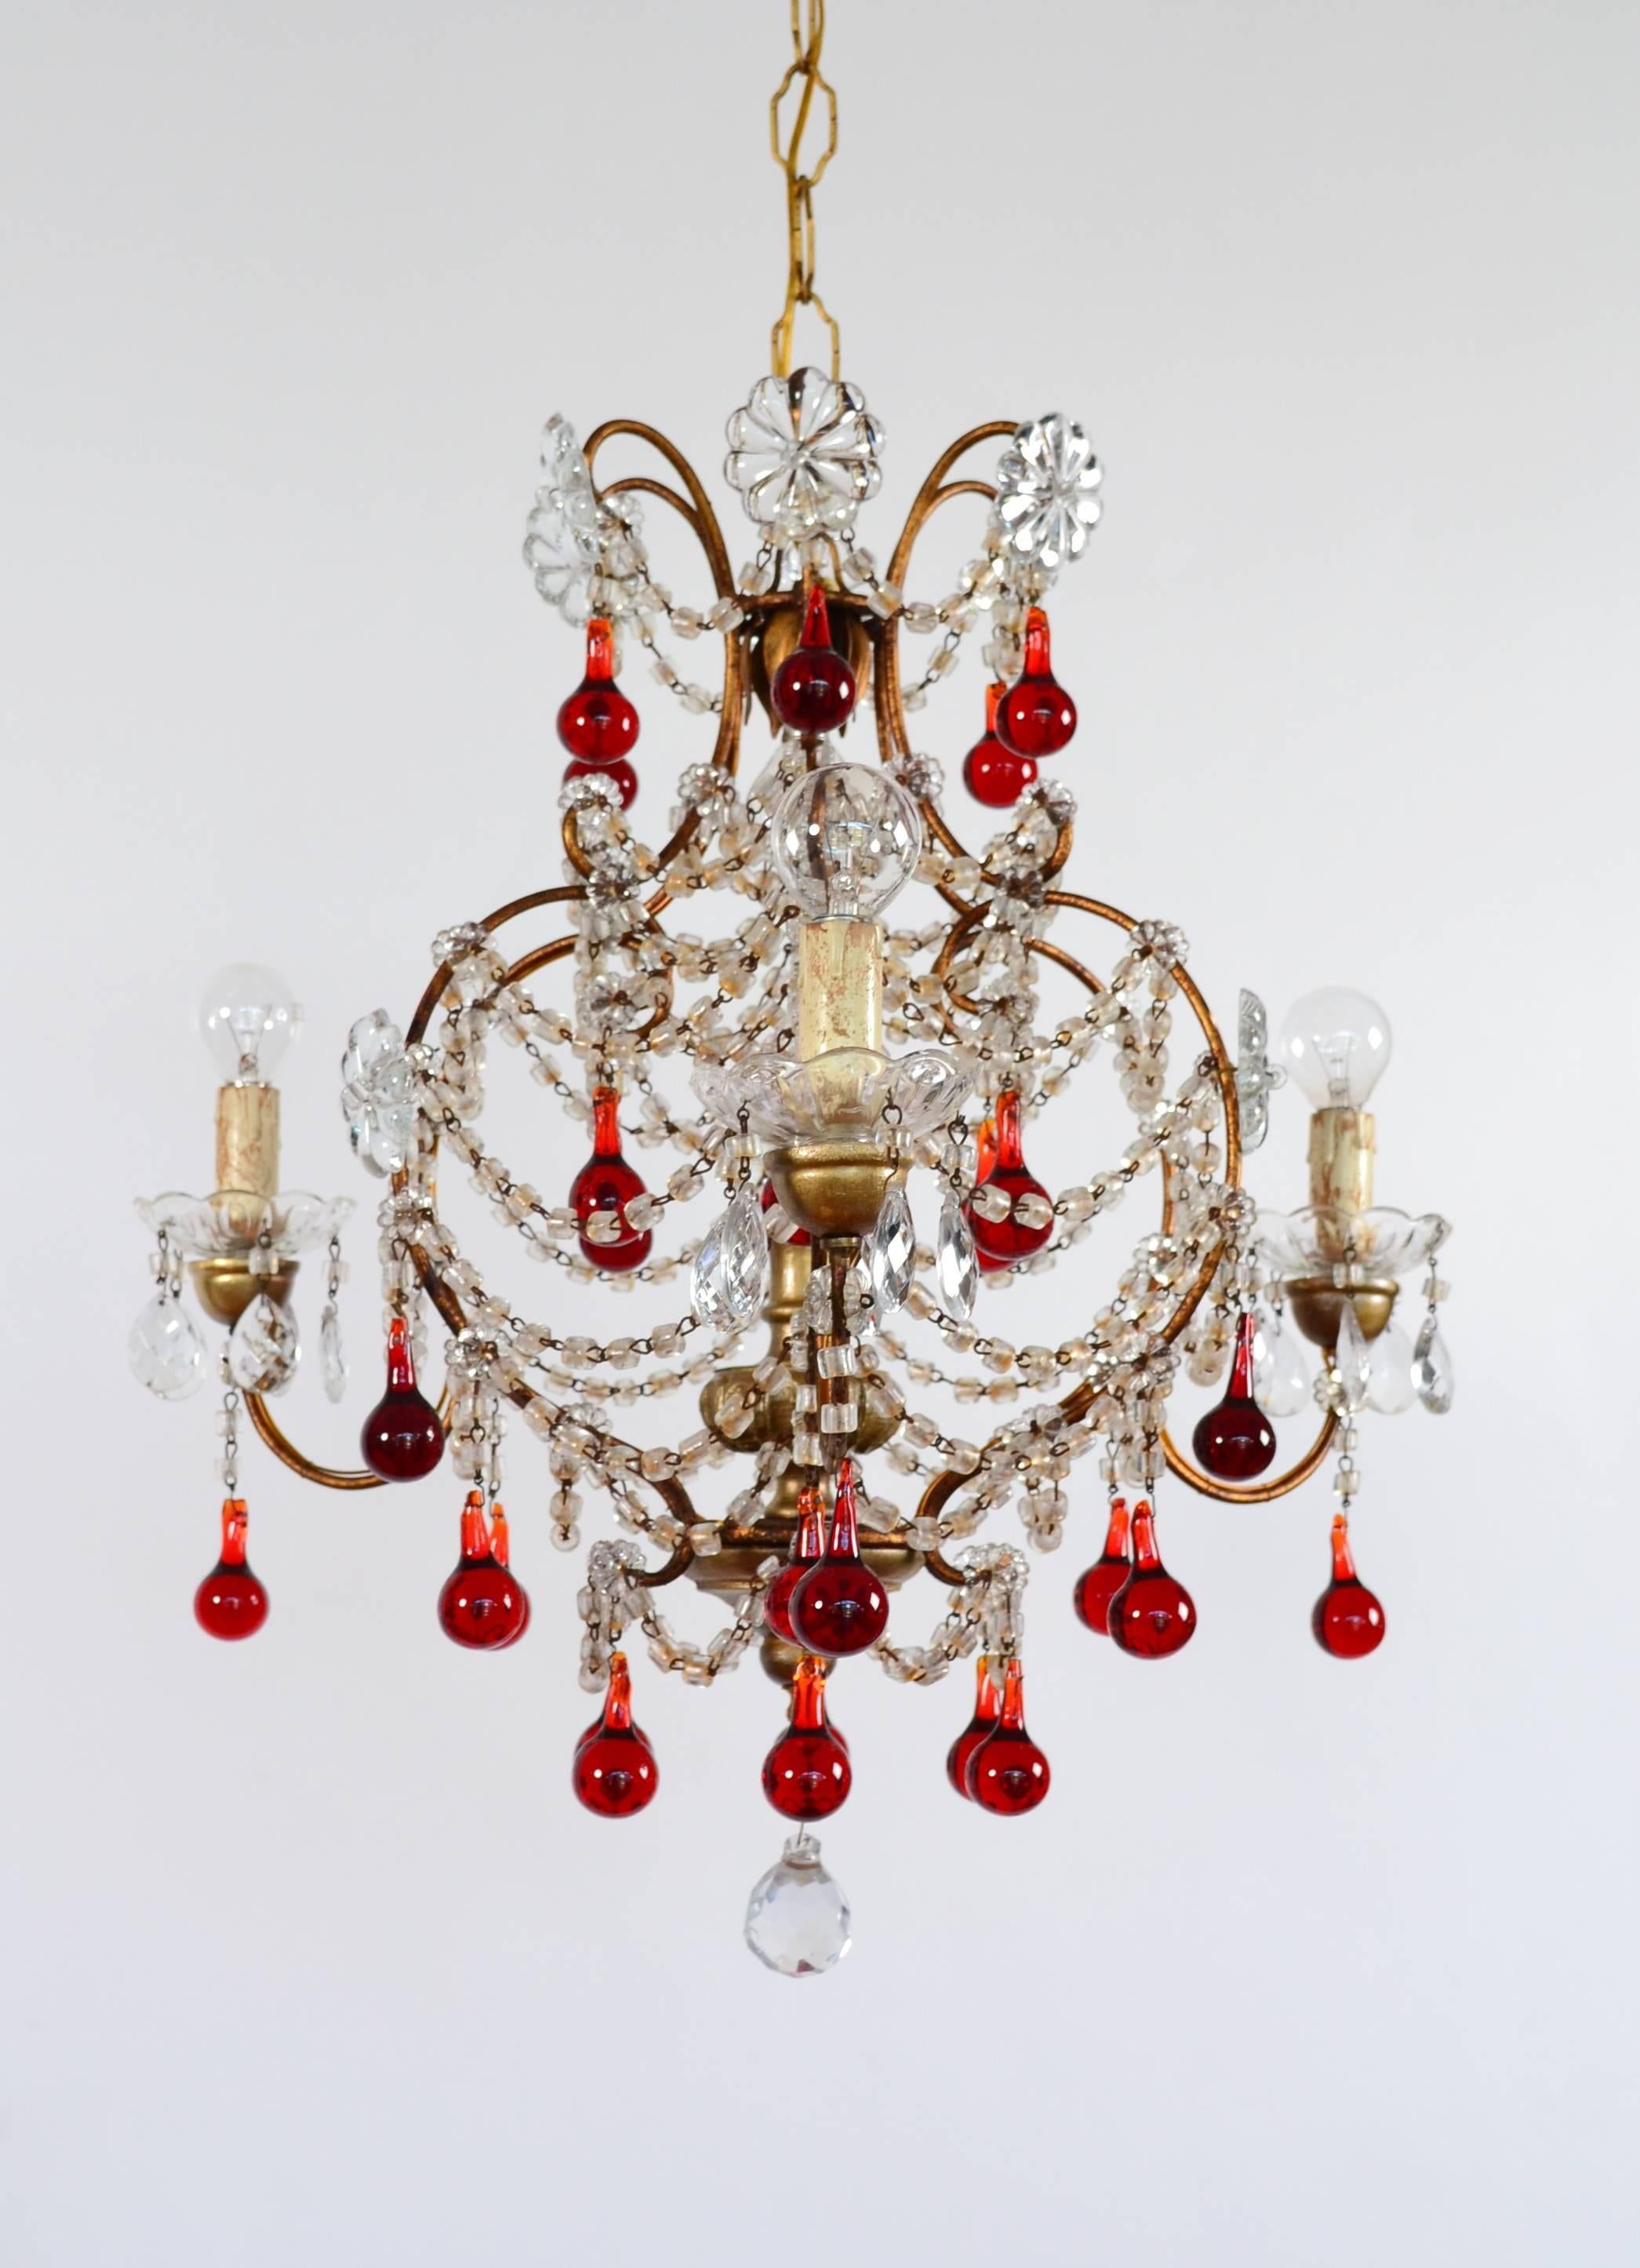 Beautiful Italian chandelier with 30 shiny red glass drops from Murano in perfect shape.
The lamp's frame is made of golden gilded iron and three projecting arms, holding wooden parts on which are mounted three glass bowls. Inside the glass bowls